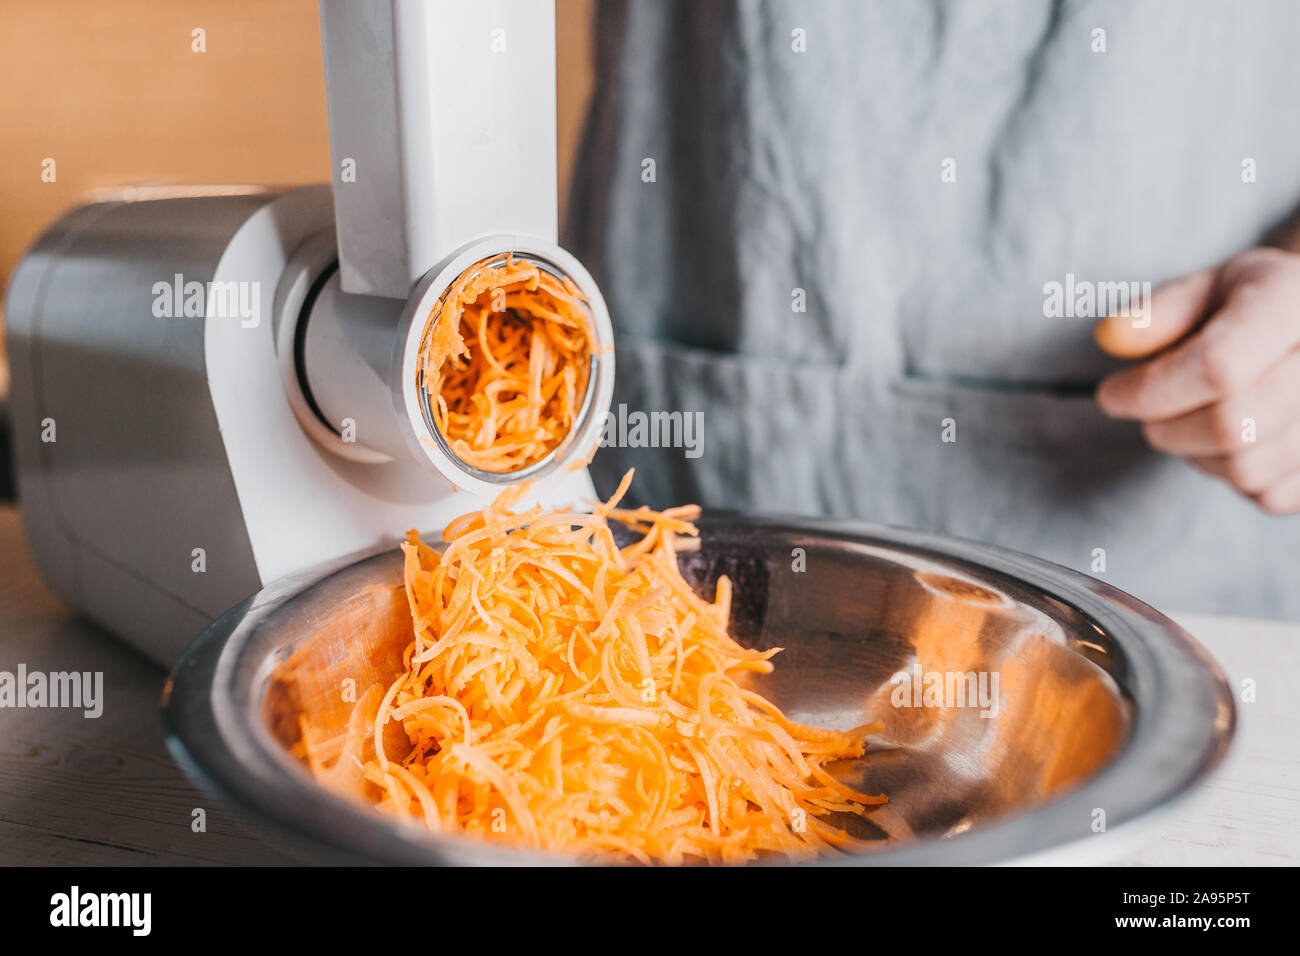 https://c8.alamy.com/comp/2A95P5T/grinding-carrots-using-an-electric-food-processor-home-cooking-2A95P5T.jpg